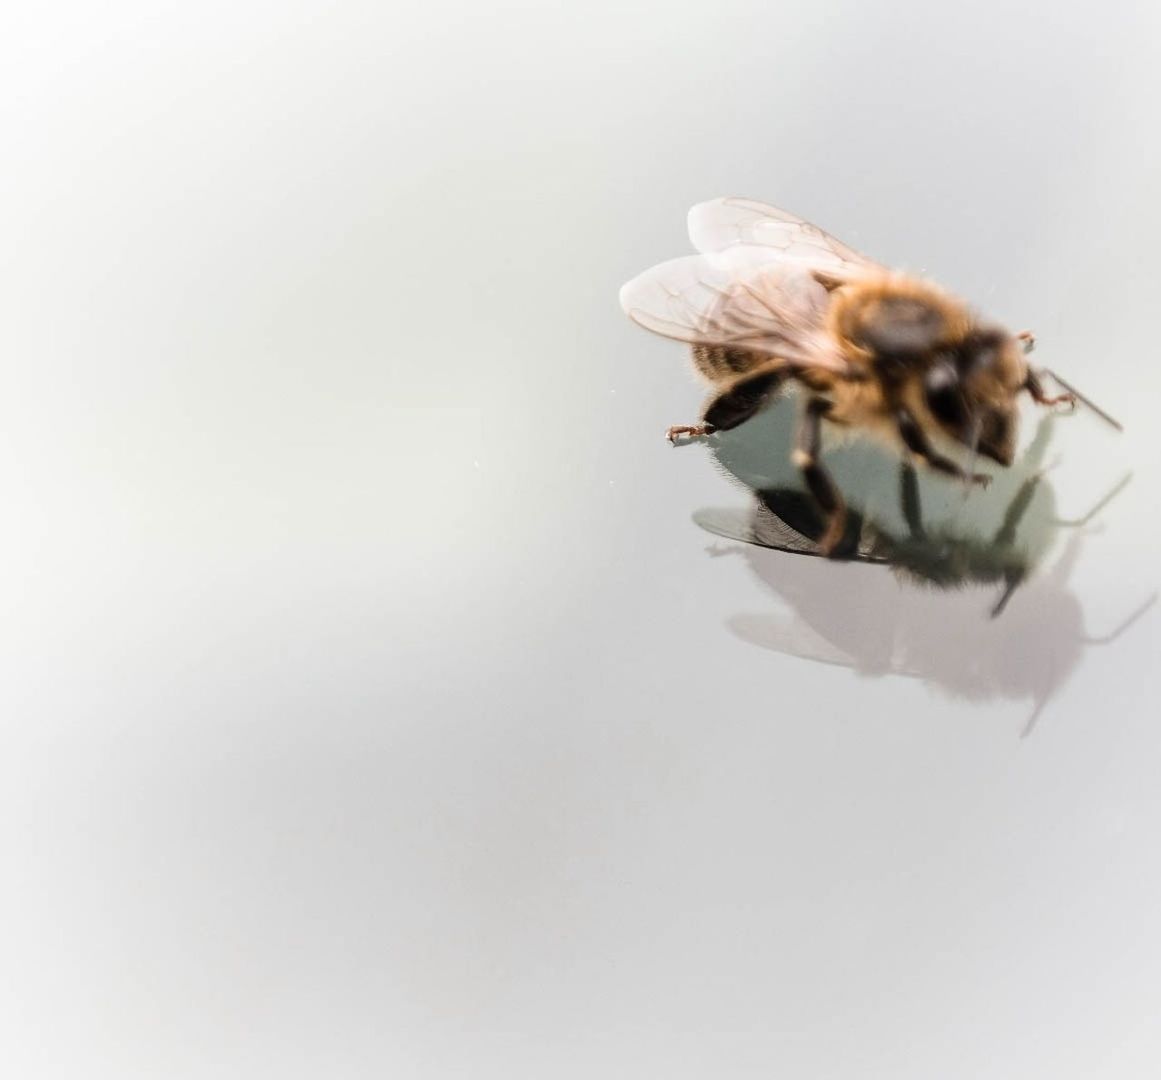 Close-up of honey bee on table